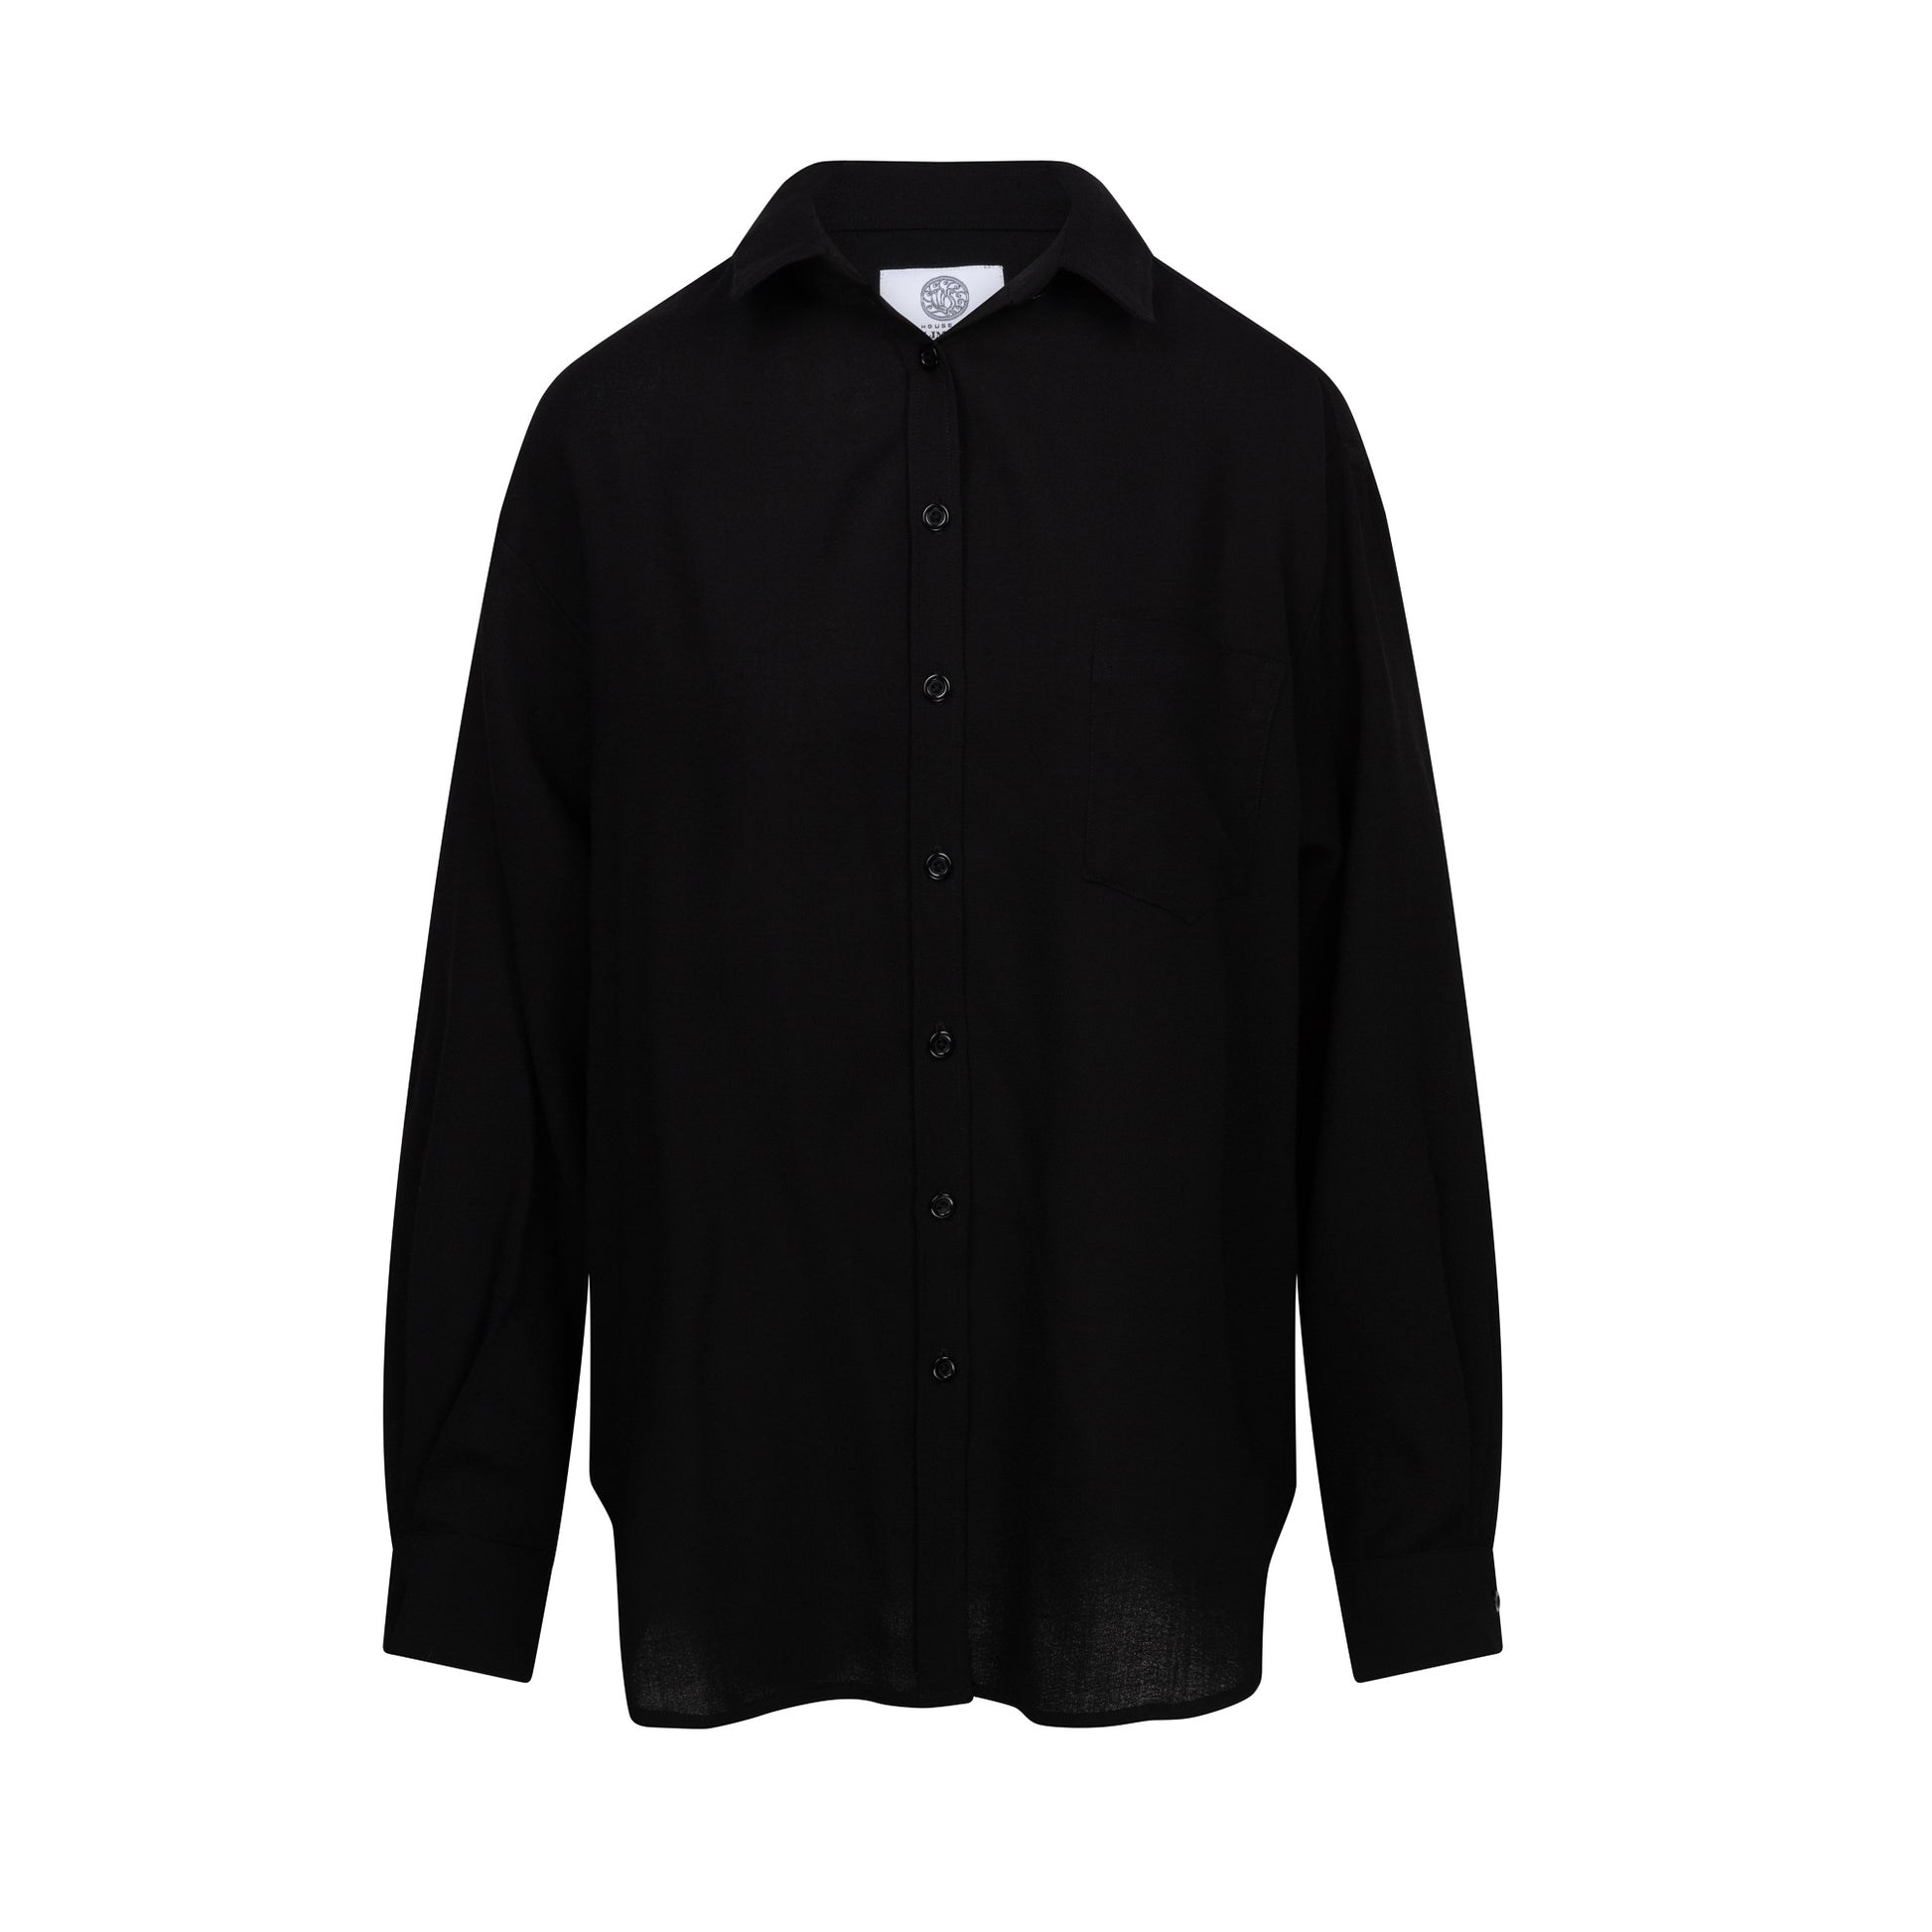 Black Shirt Limited Edition - House of Bilimoria